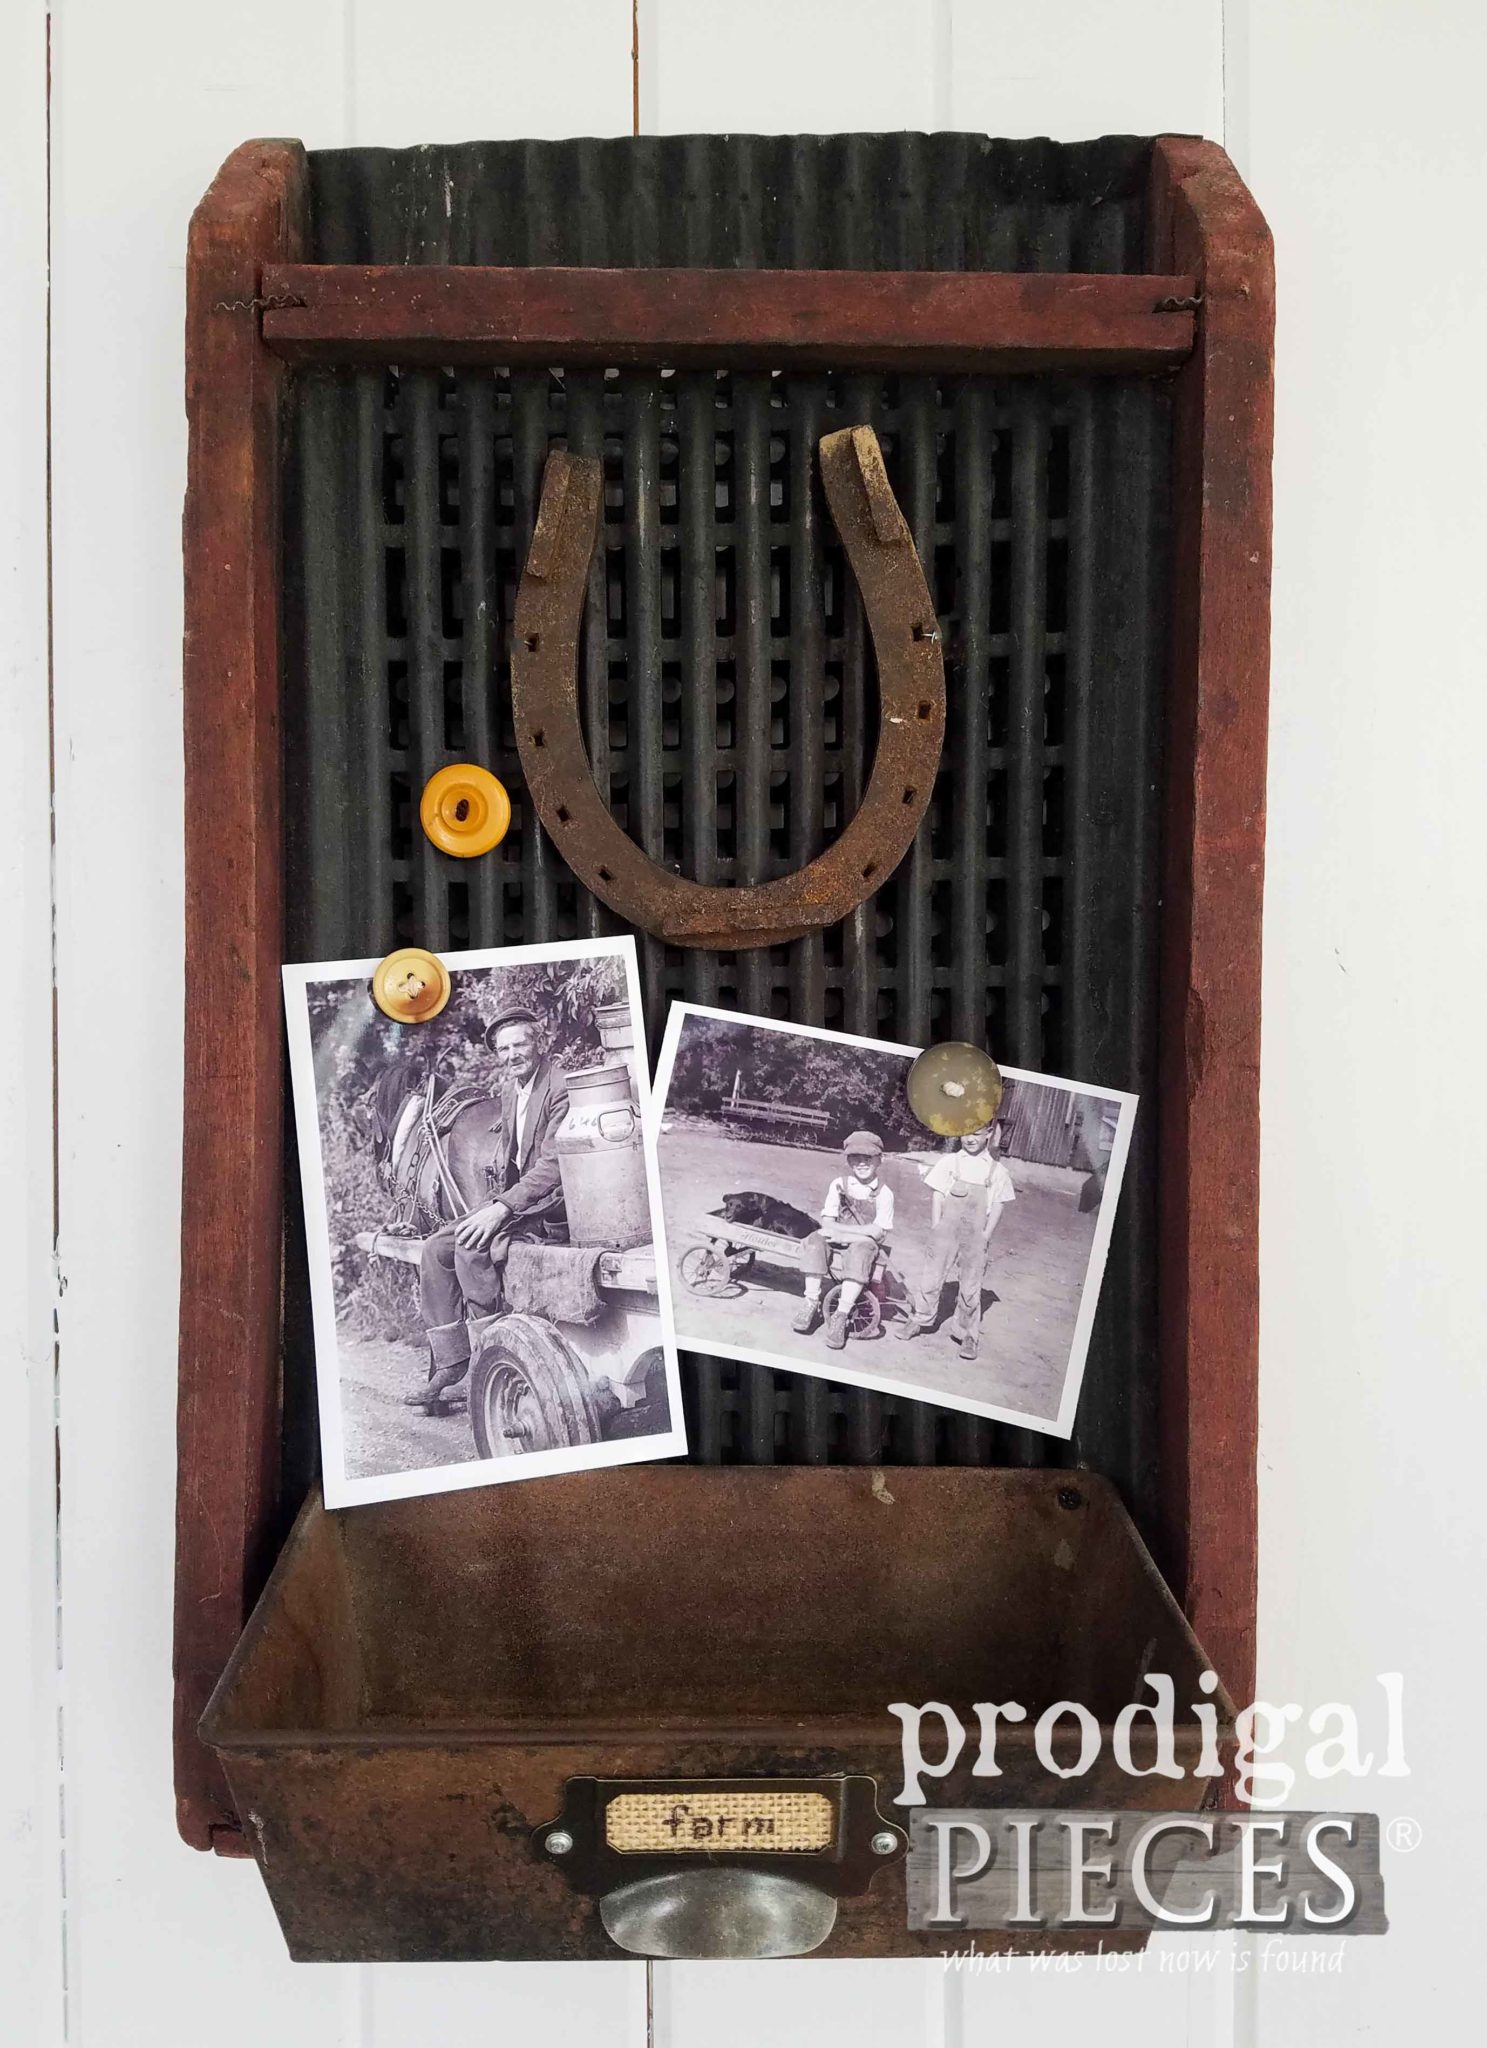 Repurposed Antique Corn Sifter Message Center by Larissa of Prodigal Pieces | prodigalpieces.com